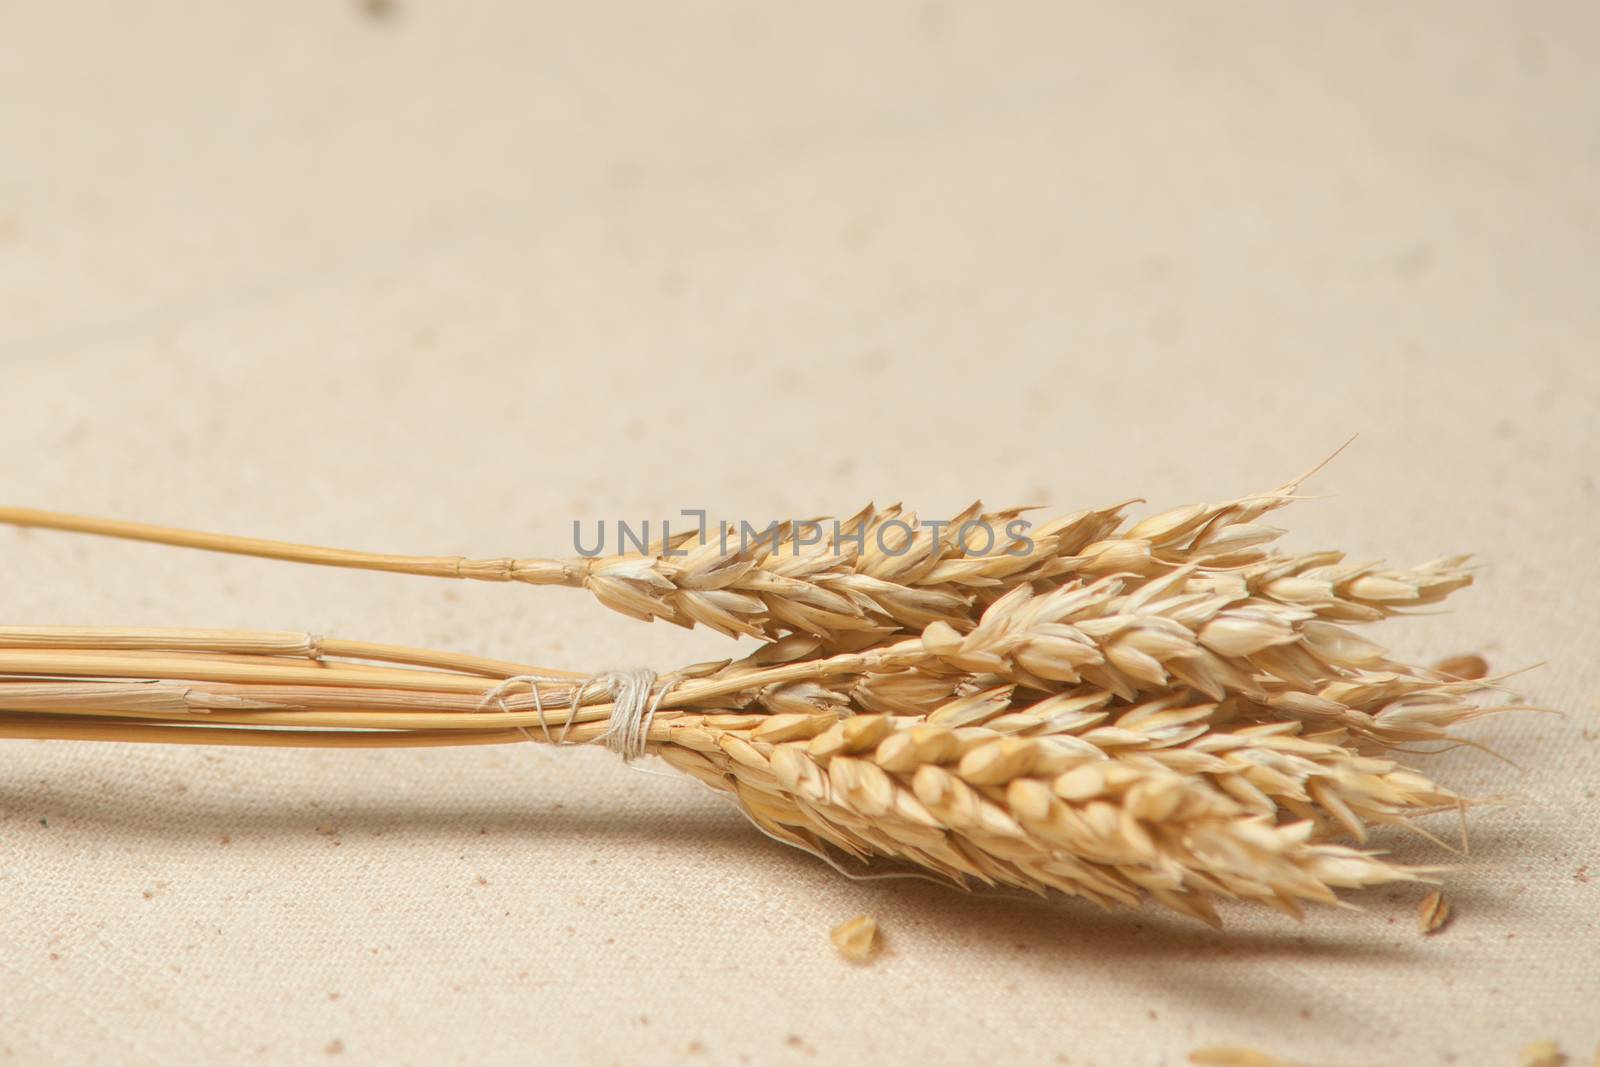 Wheat seed on sackcloth background